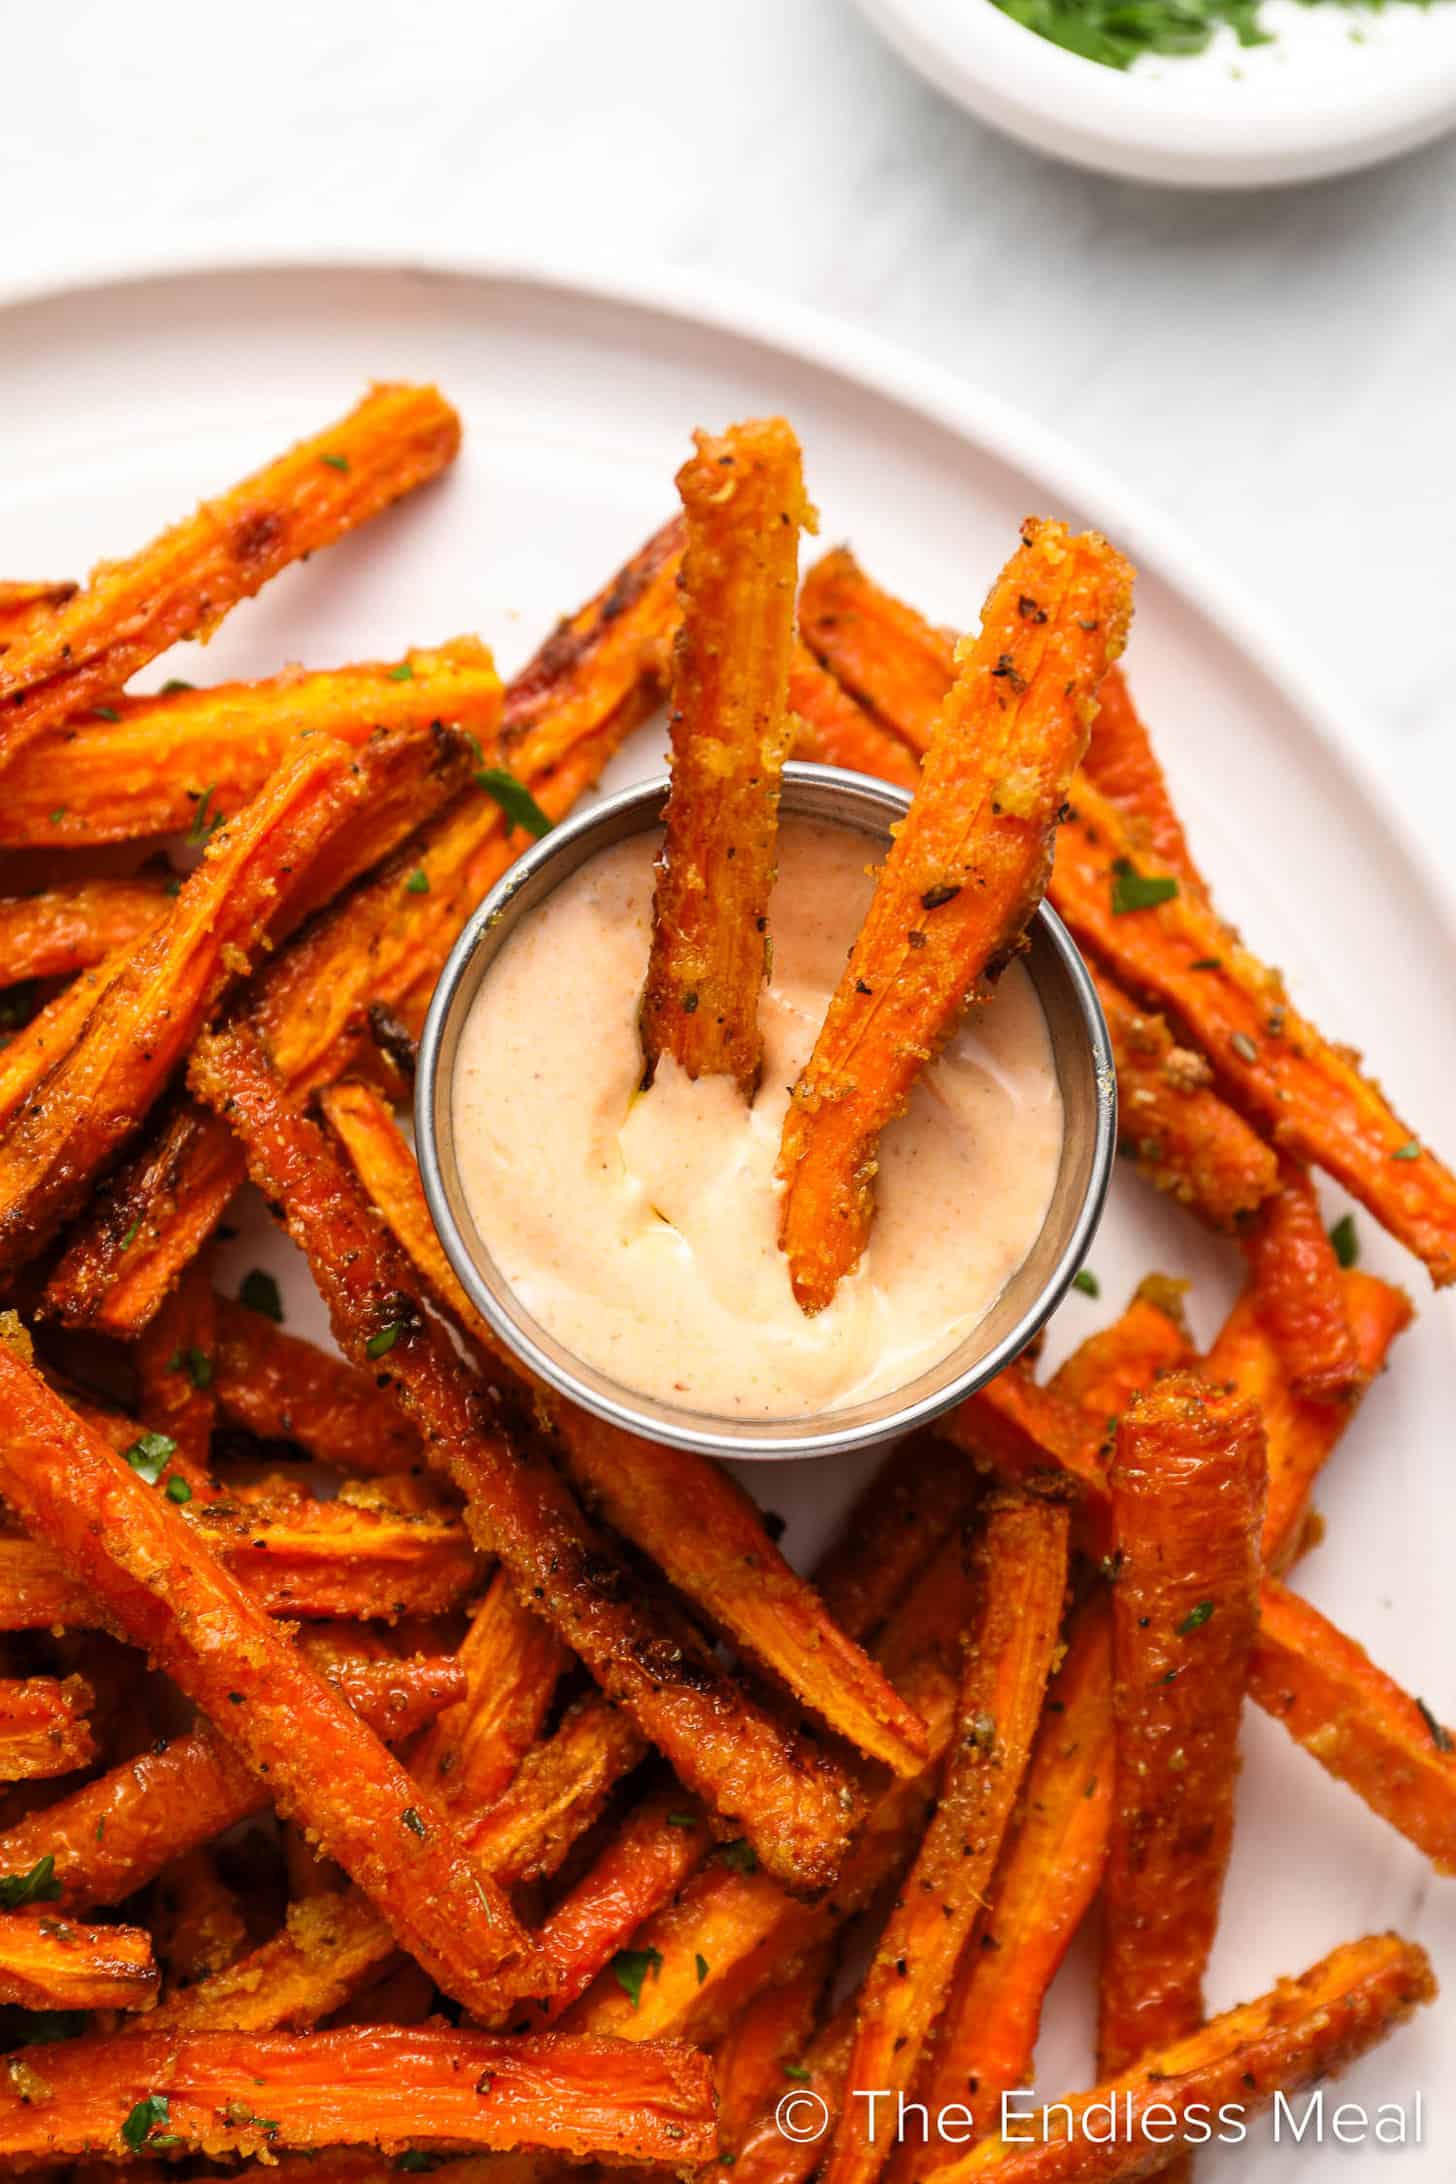 Carrot Fries being dipped into mayo